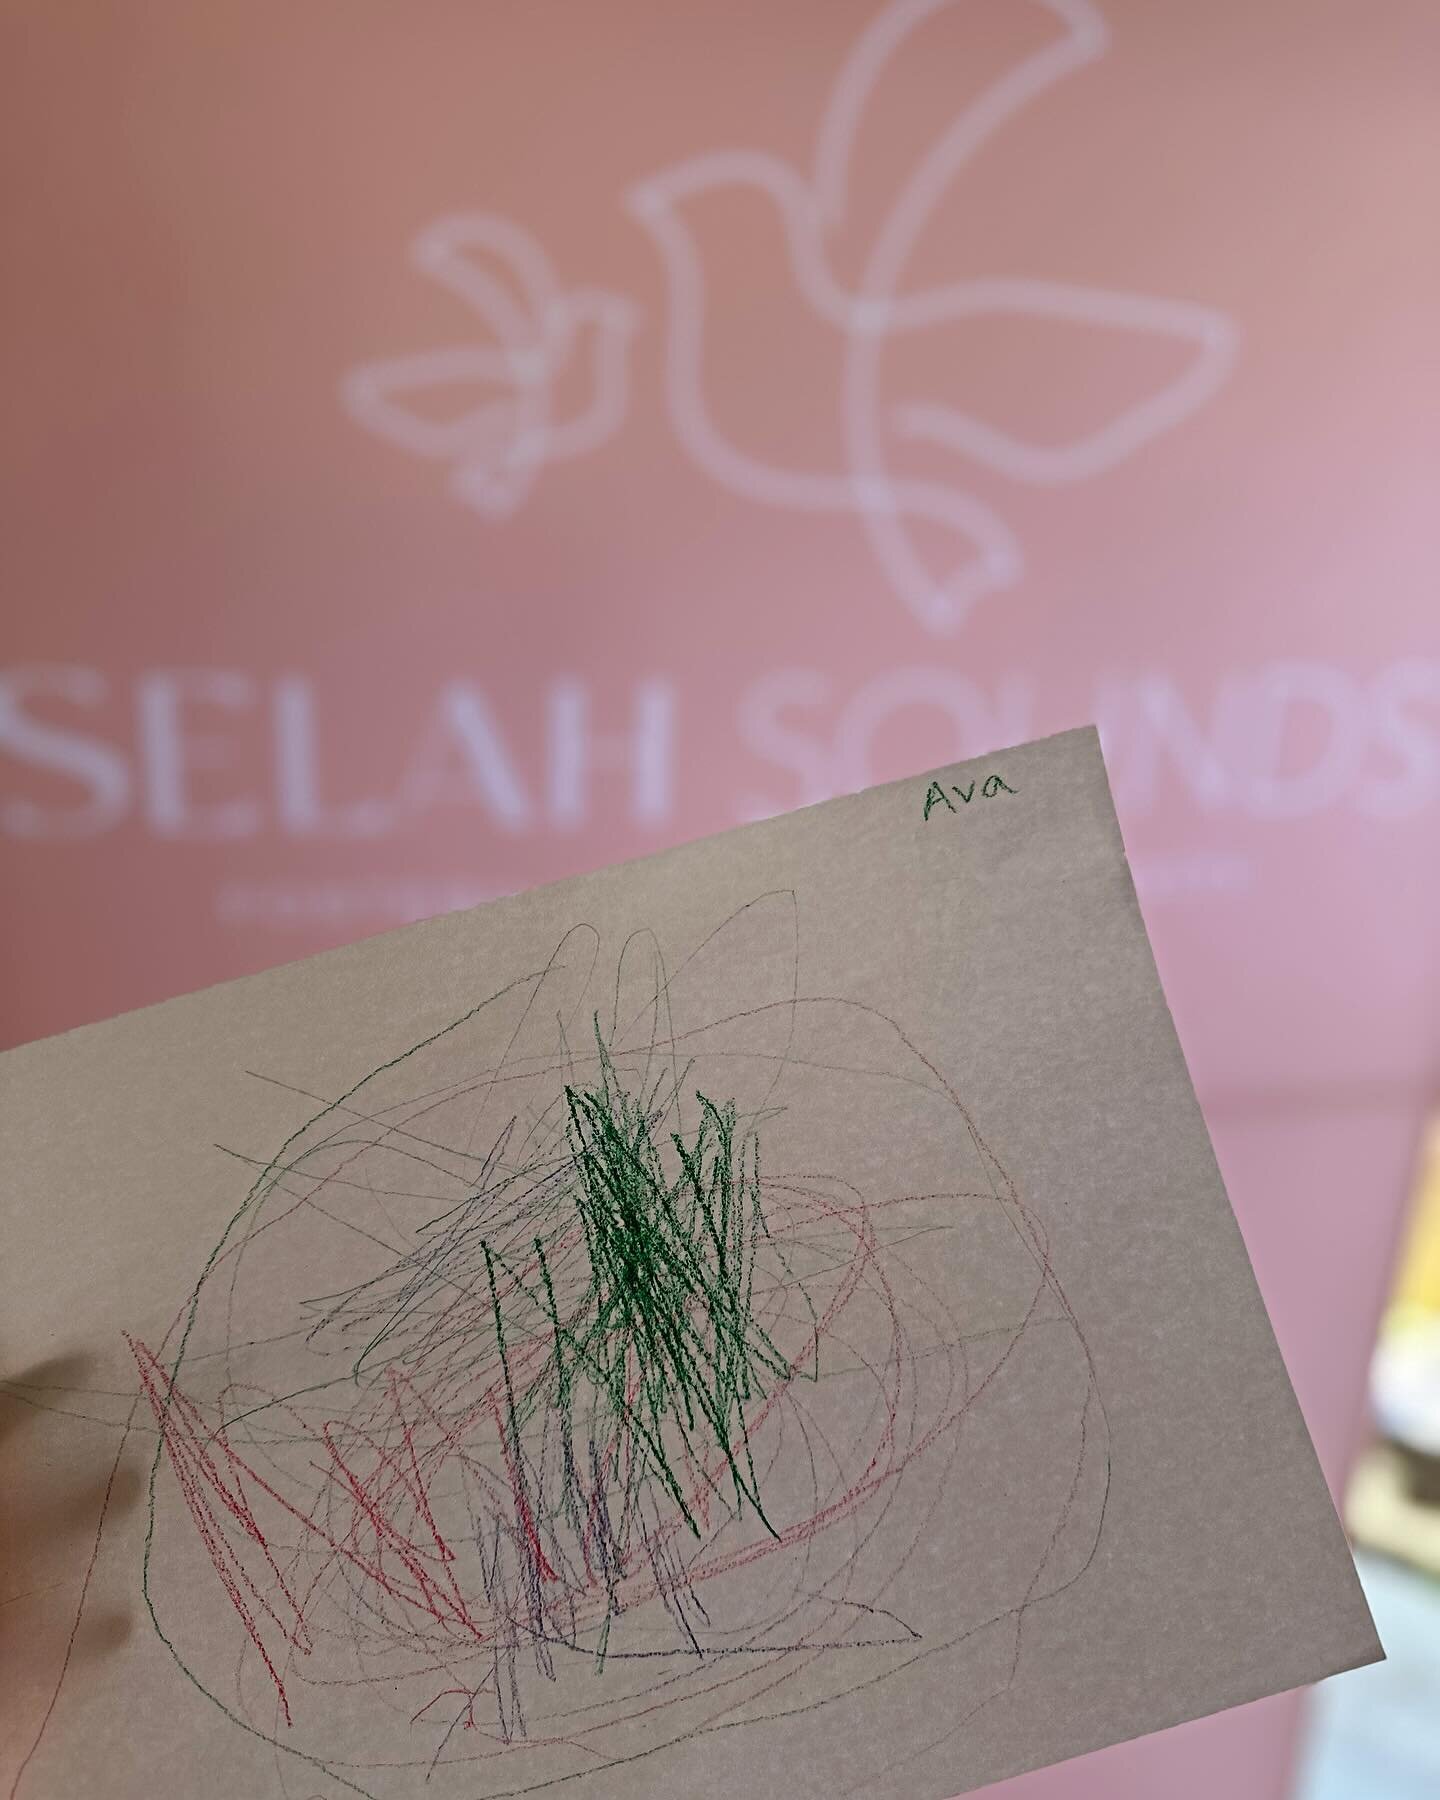 Some musical art to finish up our preschool Selah Sounds classes for the term. 🎵 🎨 can&rsquo;t wait for all the creative adventures planned for term 2. Jump on the website to find out more info, we&rsquo;d love for your little ones to join us.